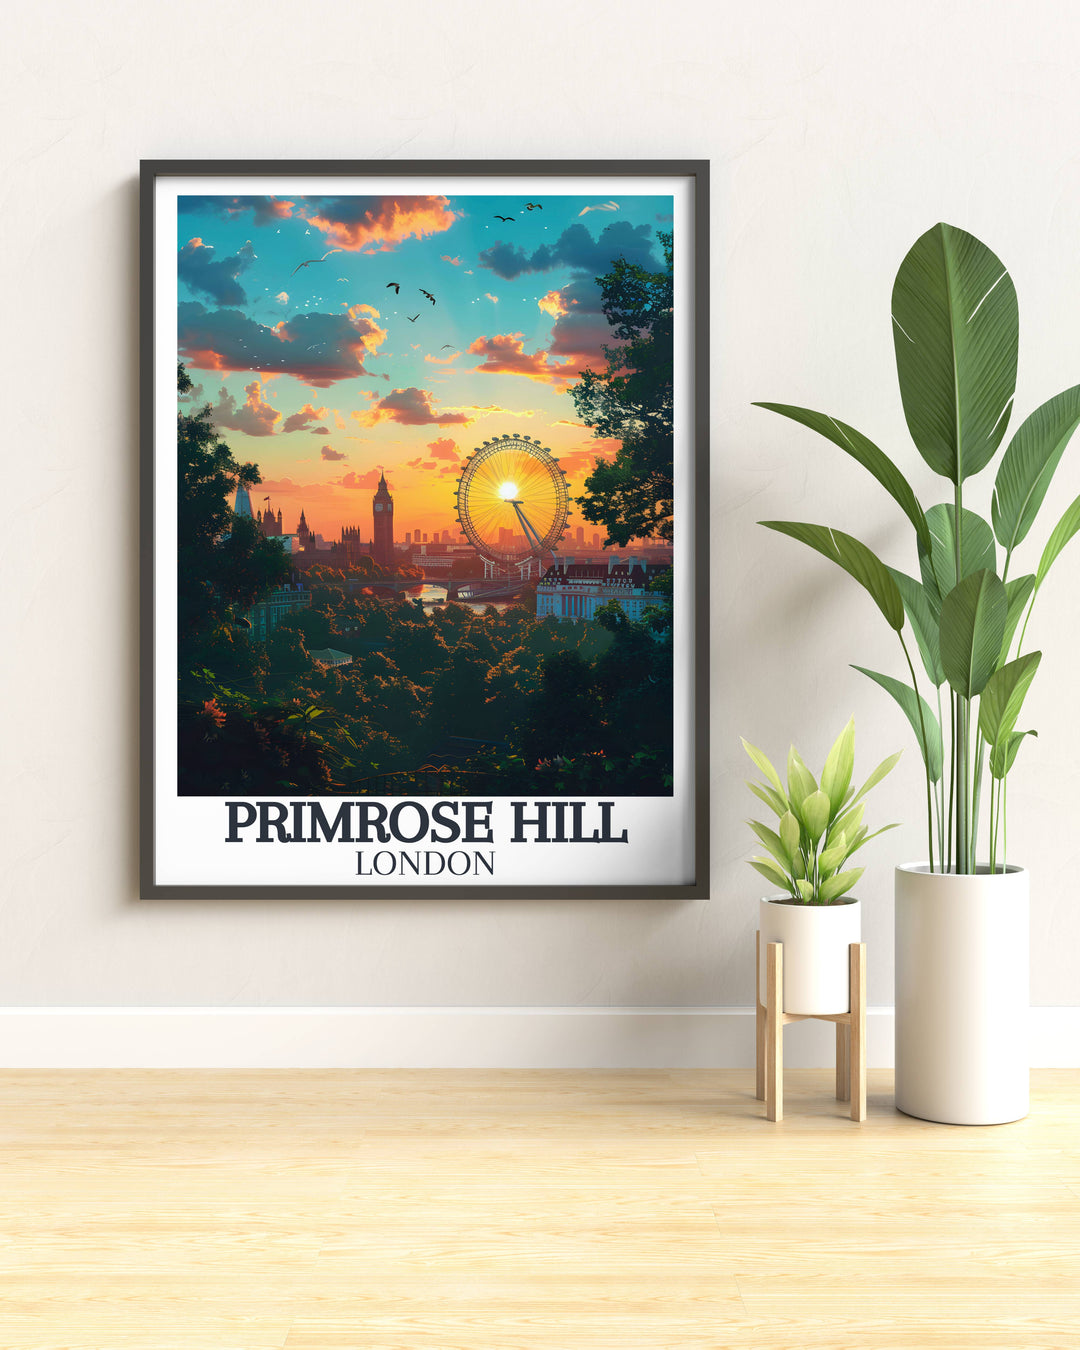 Elegant home decor poster of Primrose Hill with detailed landscape and vibrant colors, perfect for living rooms or offices.